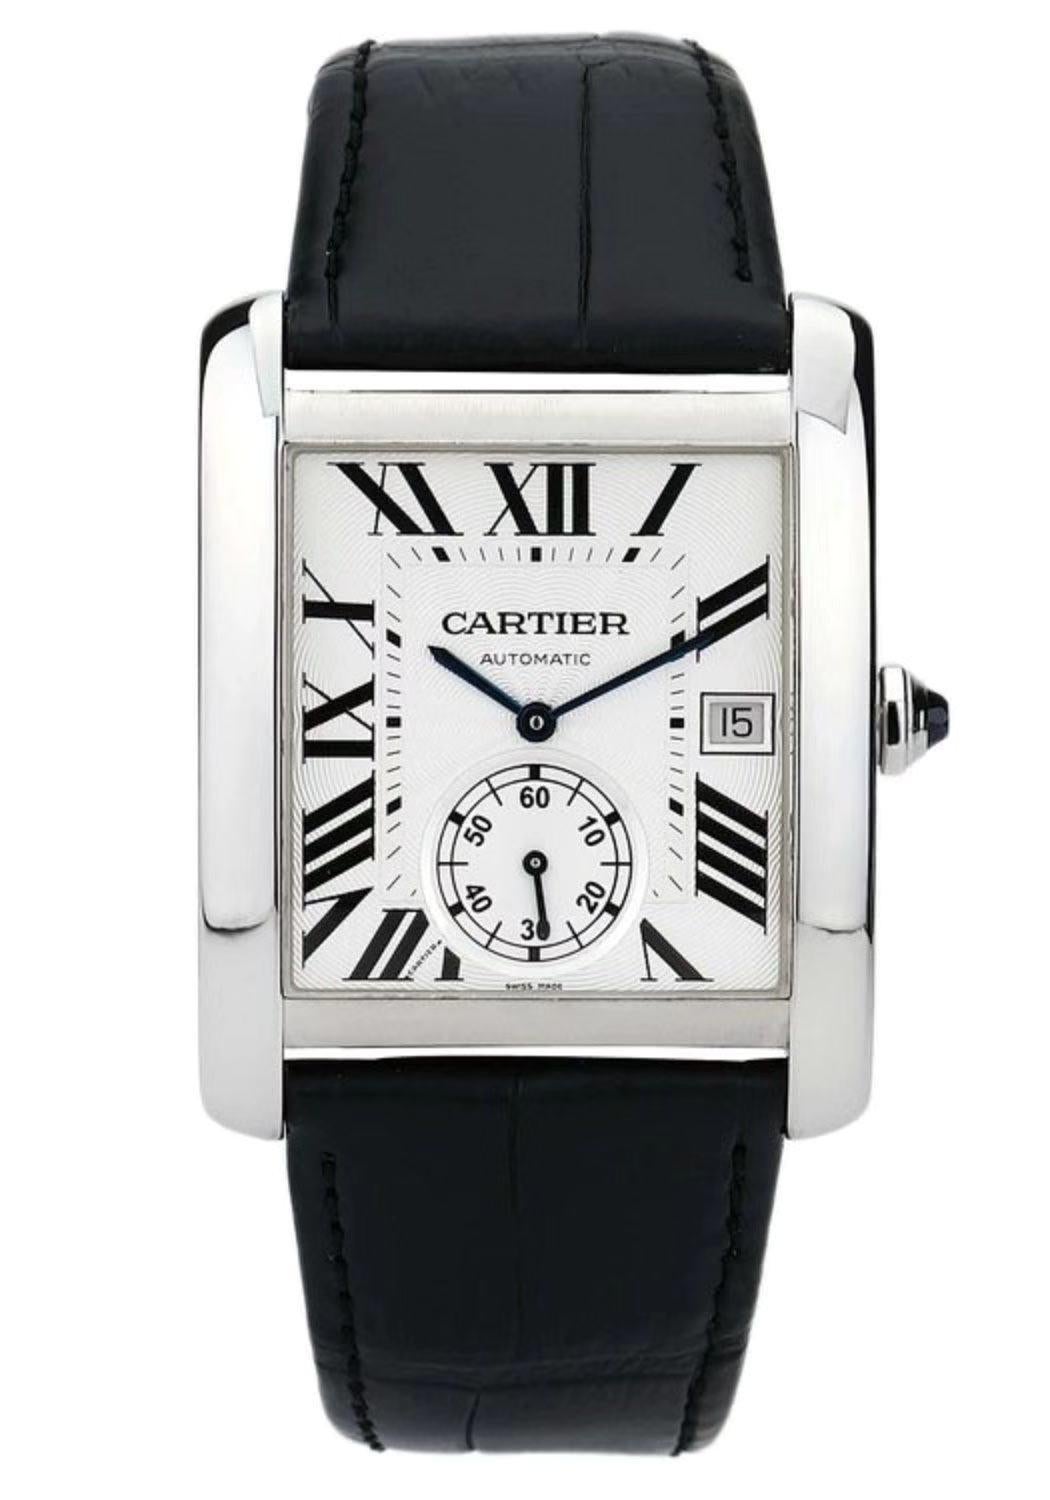 Created by Louis Cartier in 1917, the Tank family’s first prototype was presented to General Pershing of the American army during World War I. Sharp tailoring, exquisite design and monochromatic finish provide the Cartier Tank MC Gent’s Watch with a